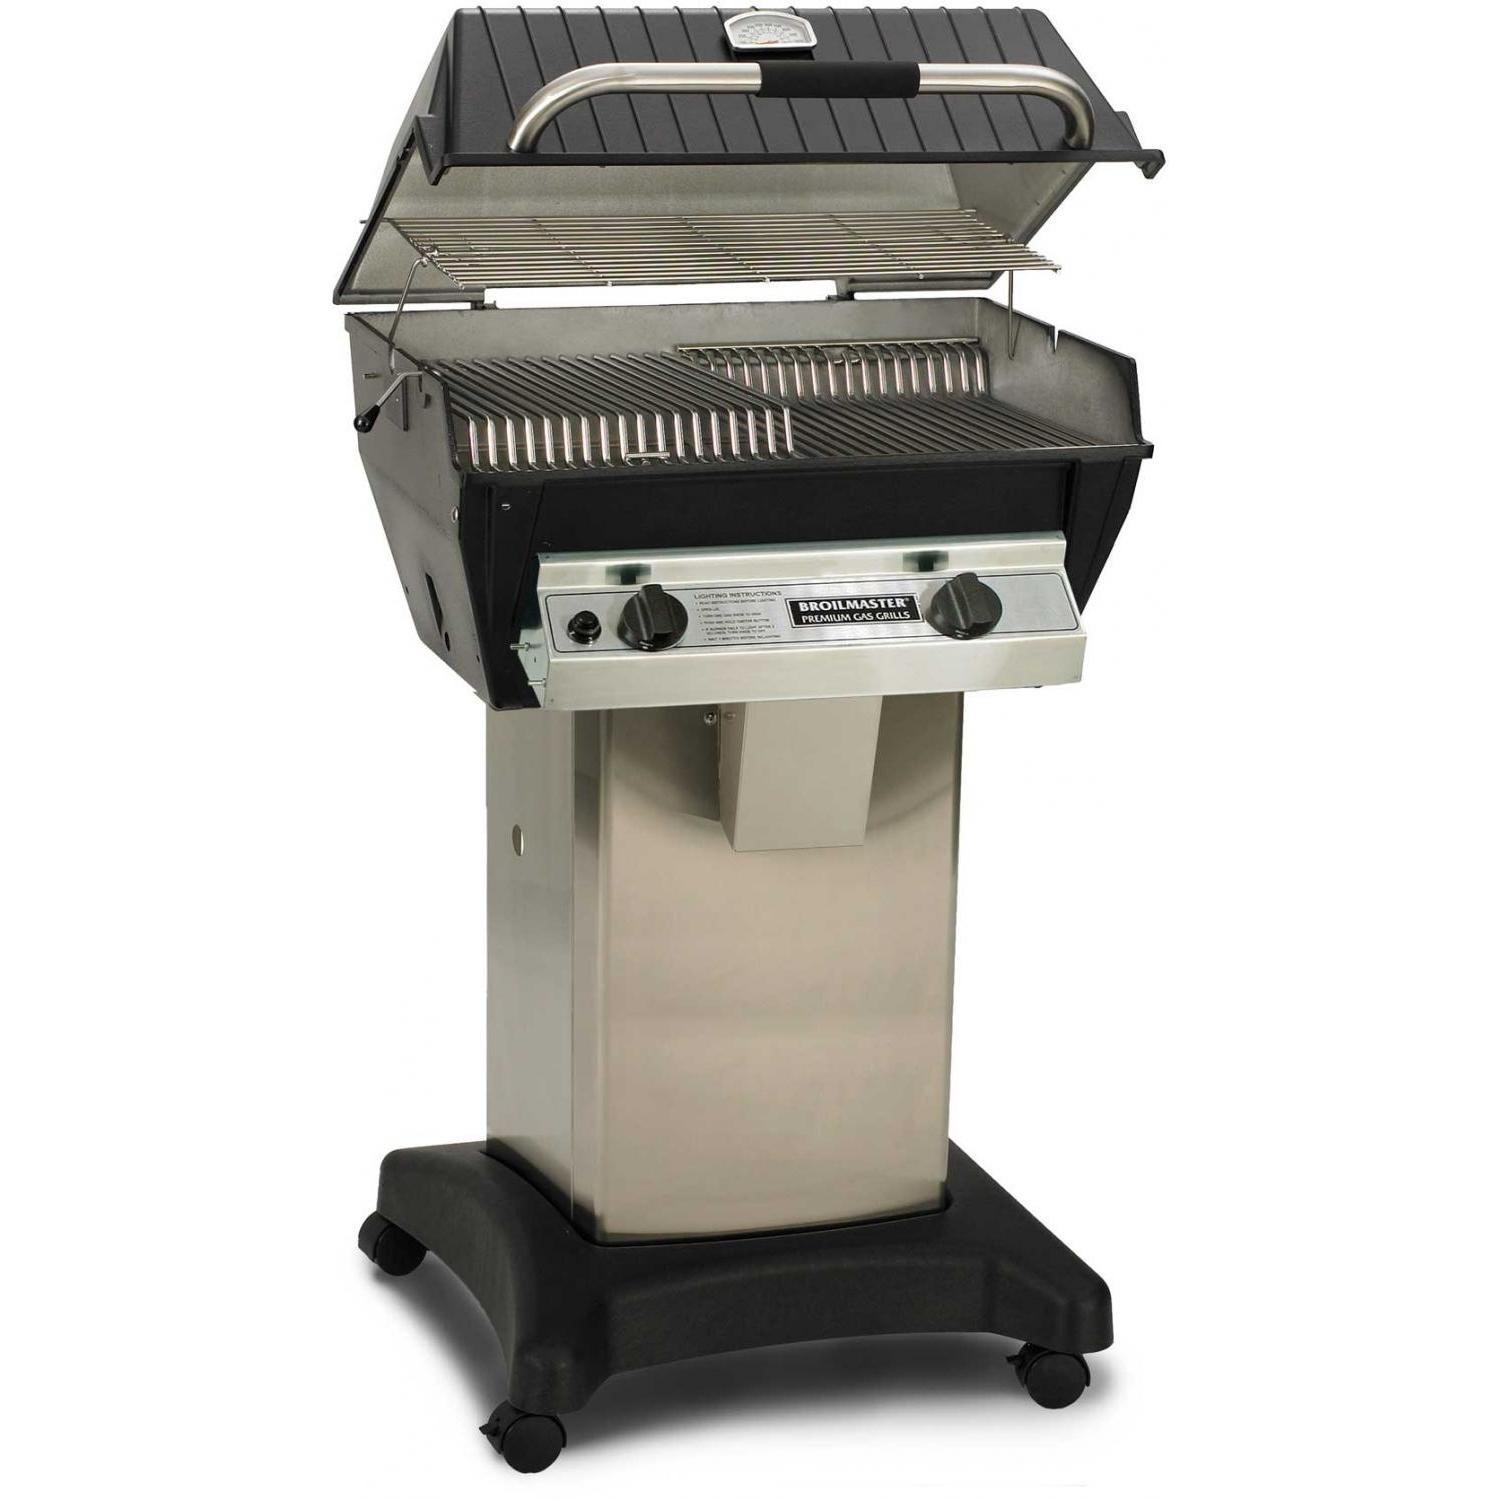 Broilmaster R3BN Infrared Combination Natural Gas Grill On Stainless Steel Cart - image 1 of 6